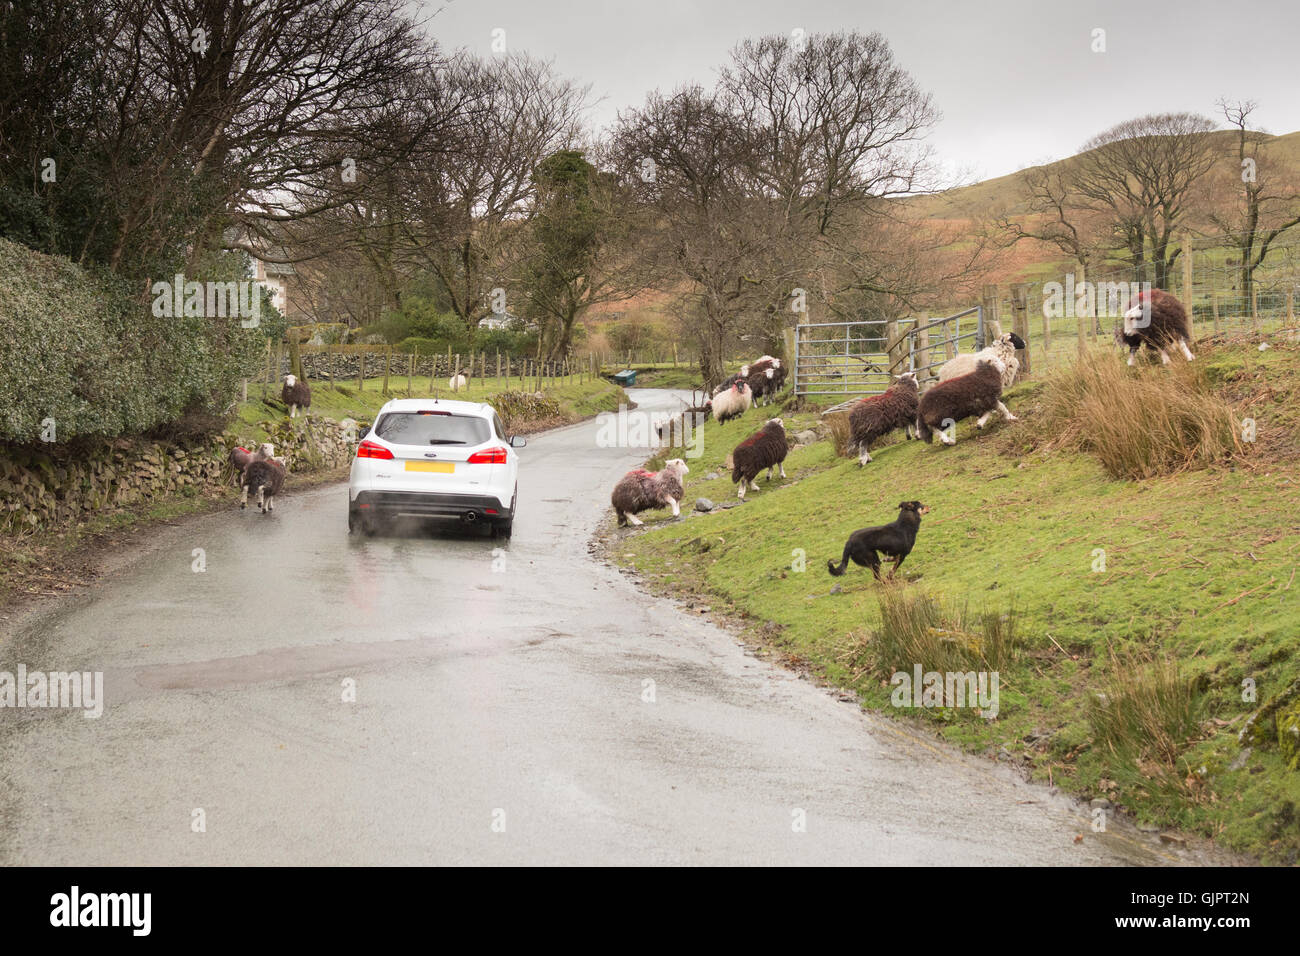 car (registration removed for privacy) driving through animals on Lake District road Stock Photo